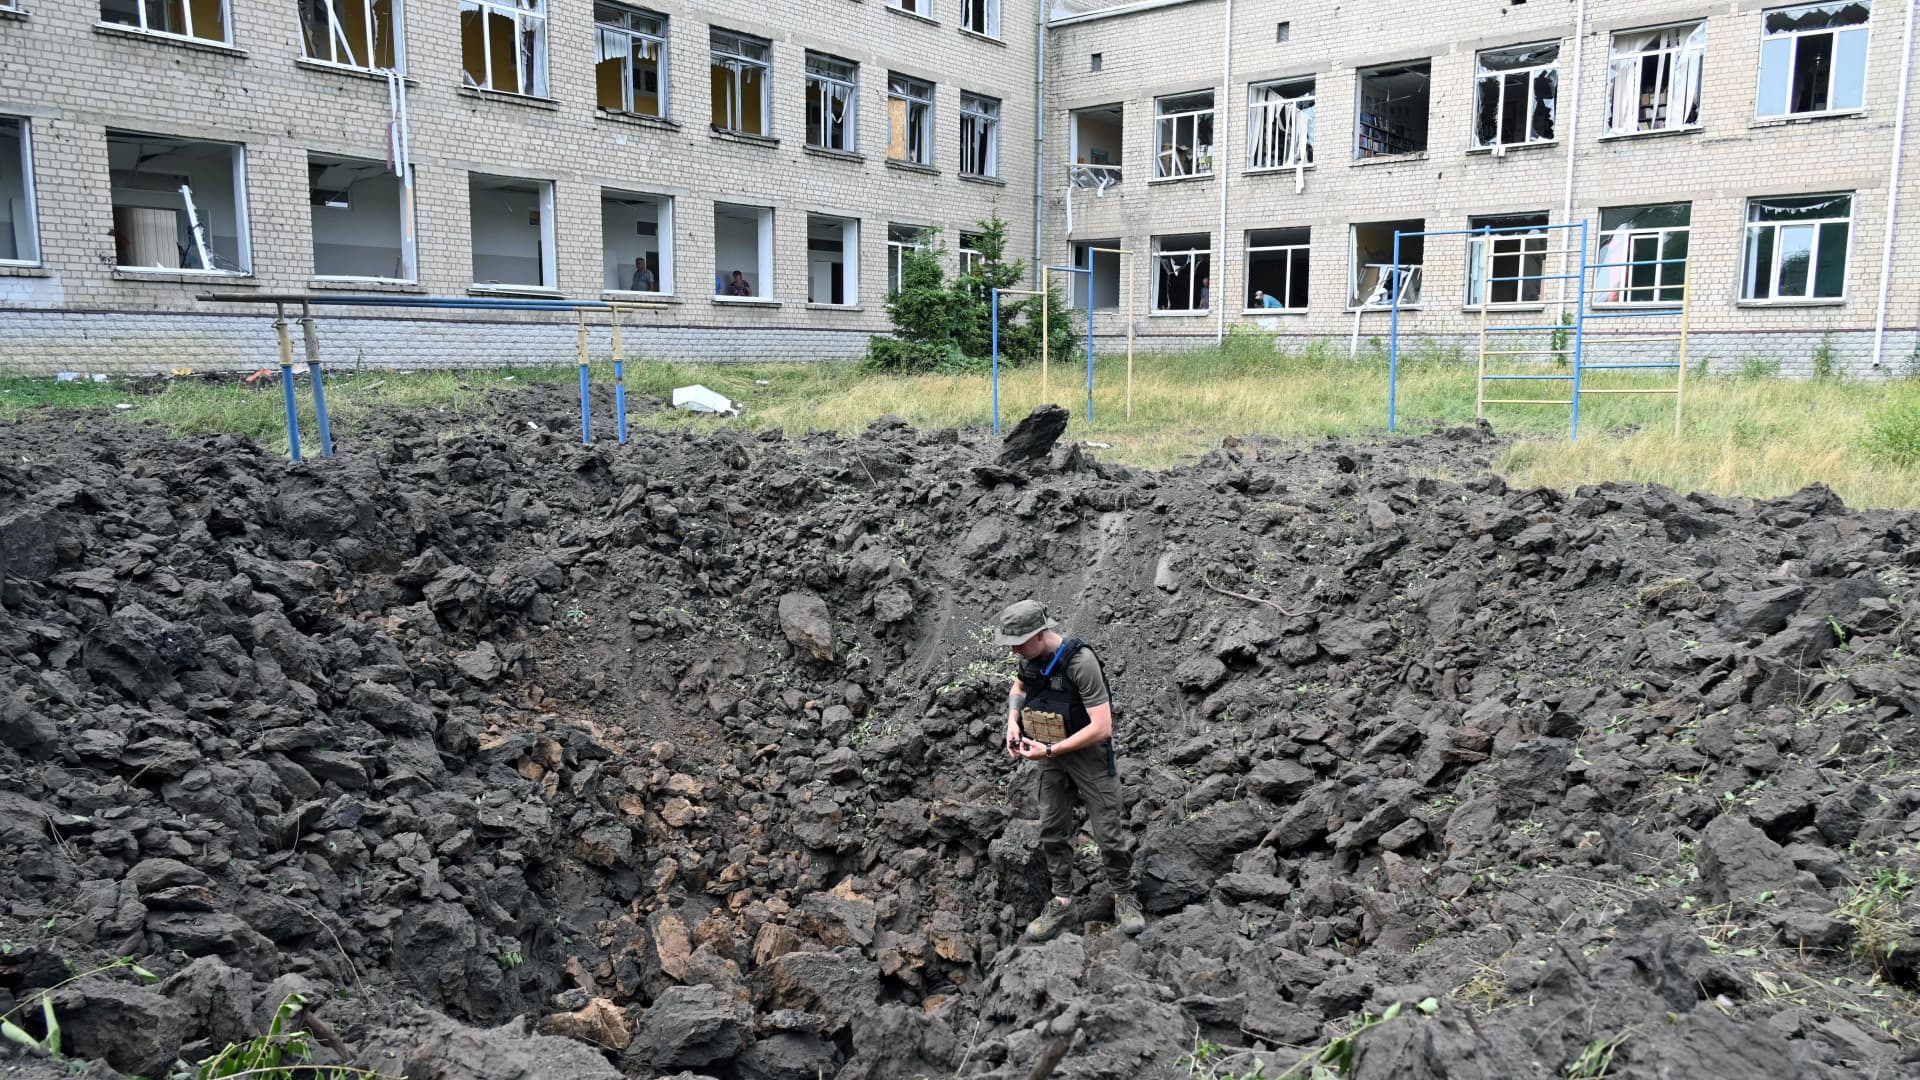 An Ukrainian serviceman examines a crater outside a special comprehensive boarding school for visually impaired children after a strike on its premises, in Kharkiv, on July 7, 2022, amid Russia's military invasion launched on Ukraine.